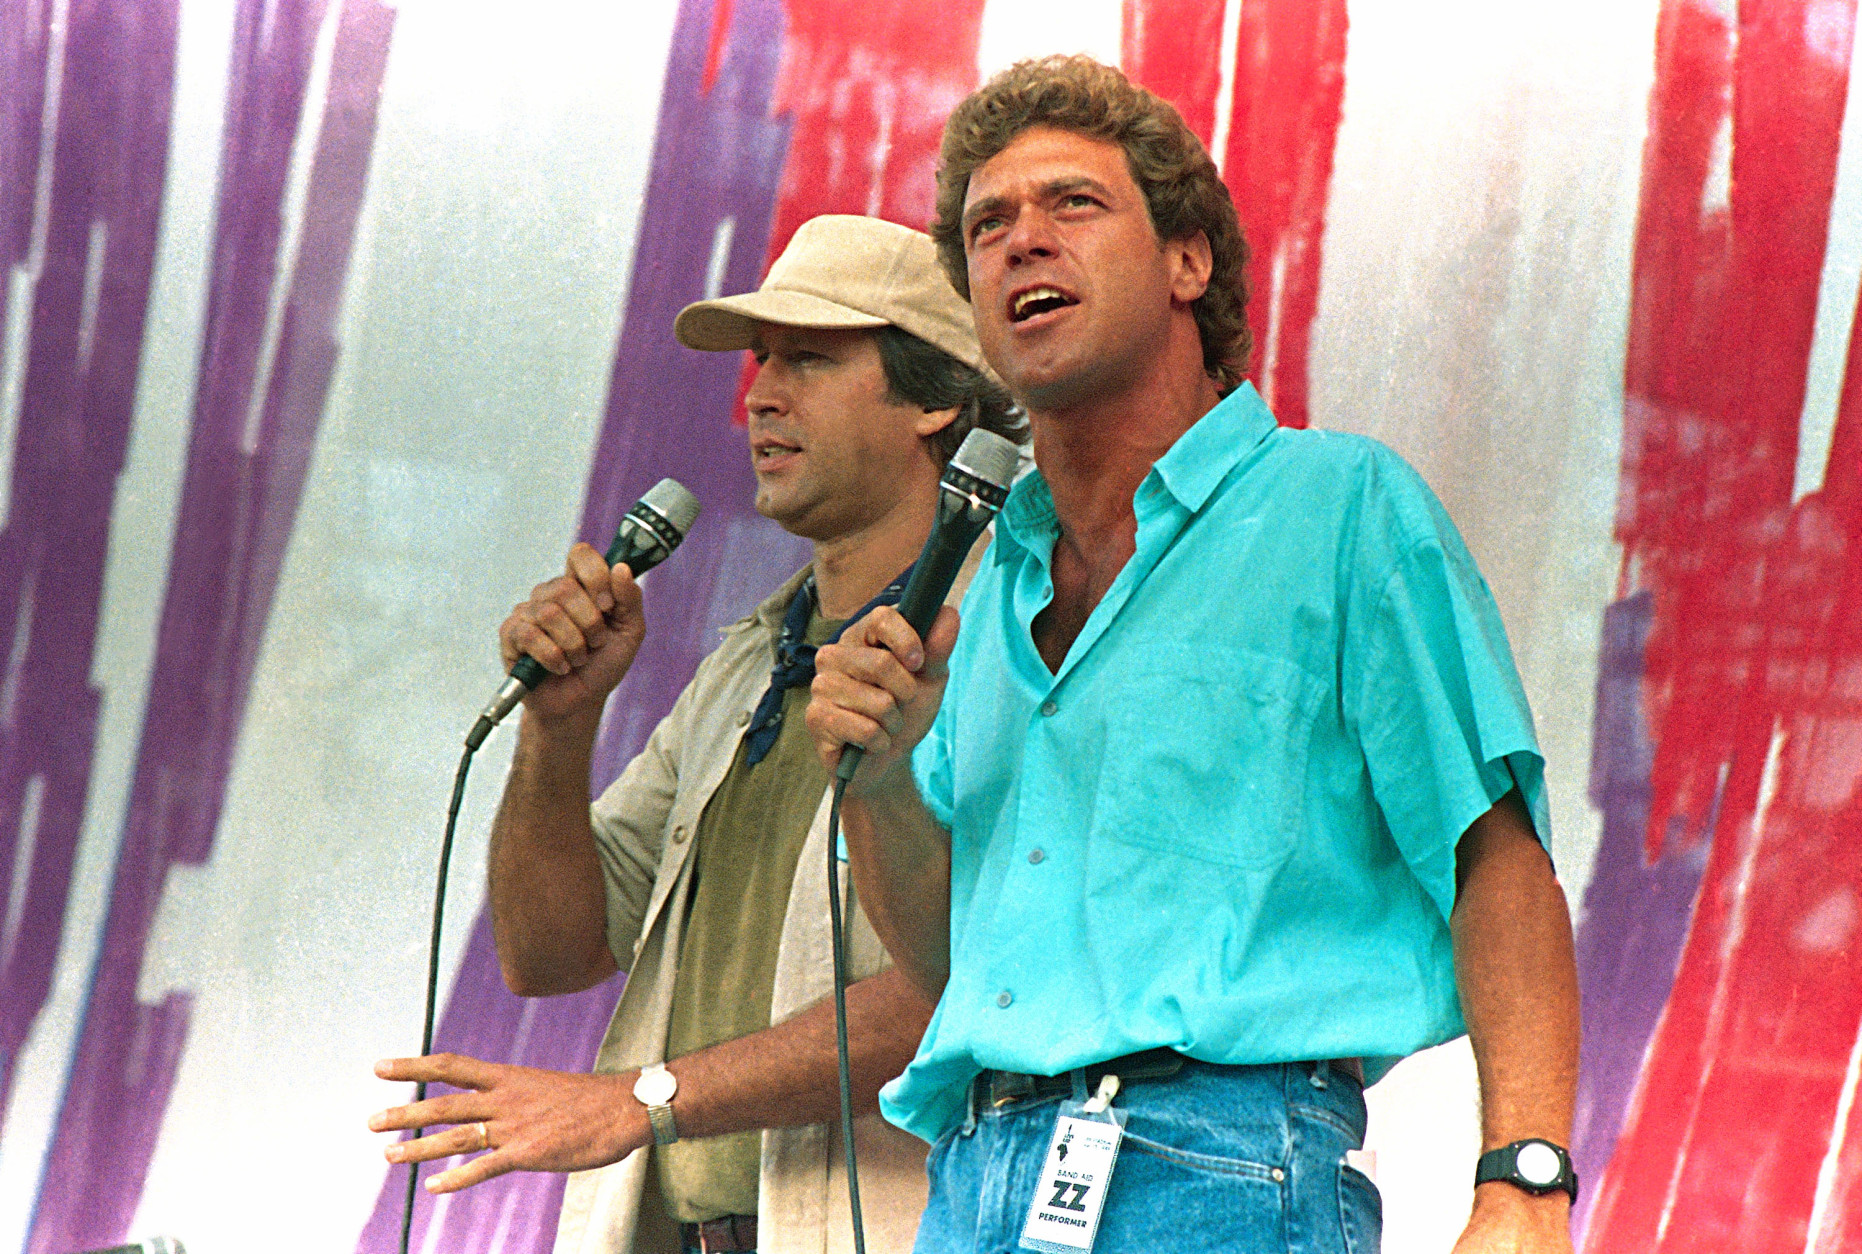 Former Saturday Night Live television show members Chevy Chase, left, and Joe Piscopo, entertain the crowd during the Live Aid famine relief concert at JFK Stadium in Philadelphia Pa., July 13,1985. (AP Photo/Amy Sancetta)